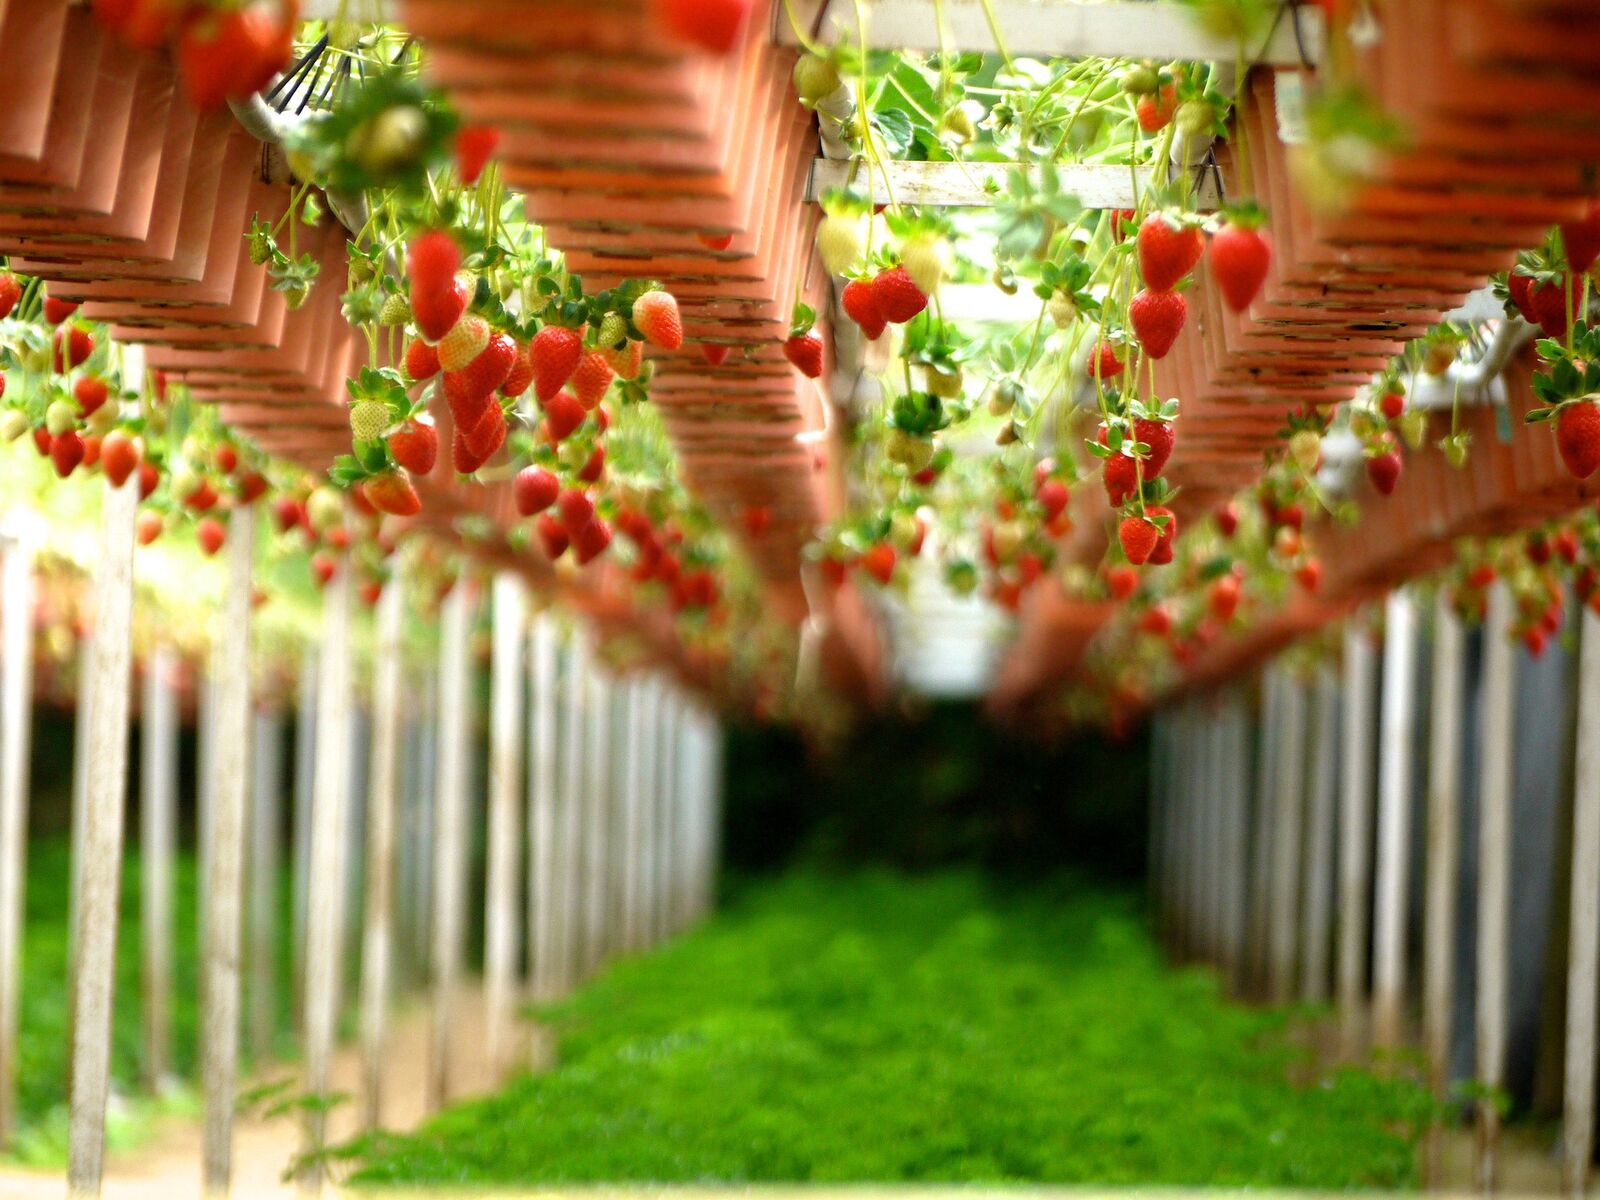 Hanging strawberry plants with fruit